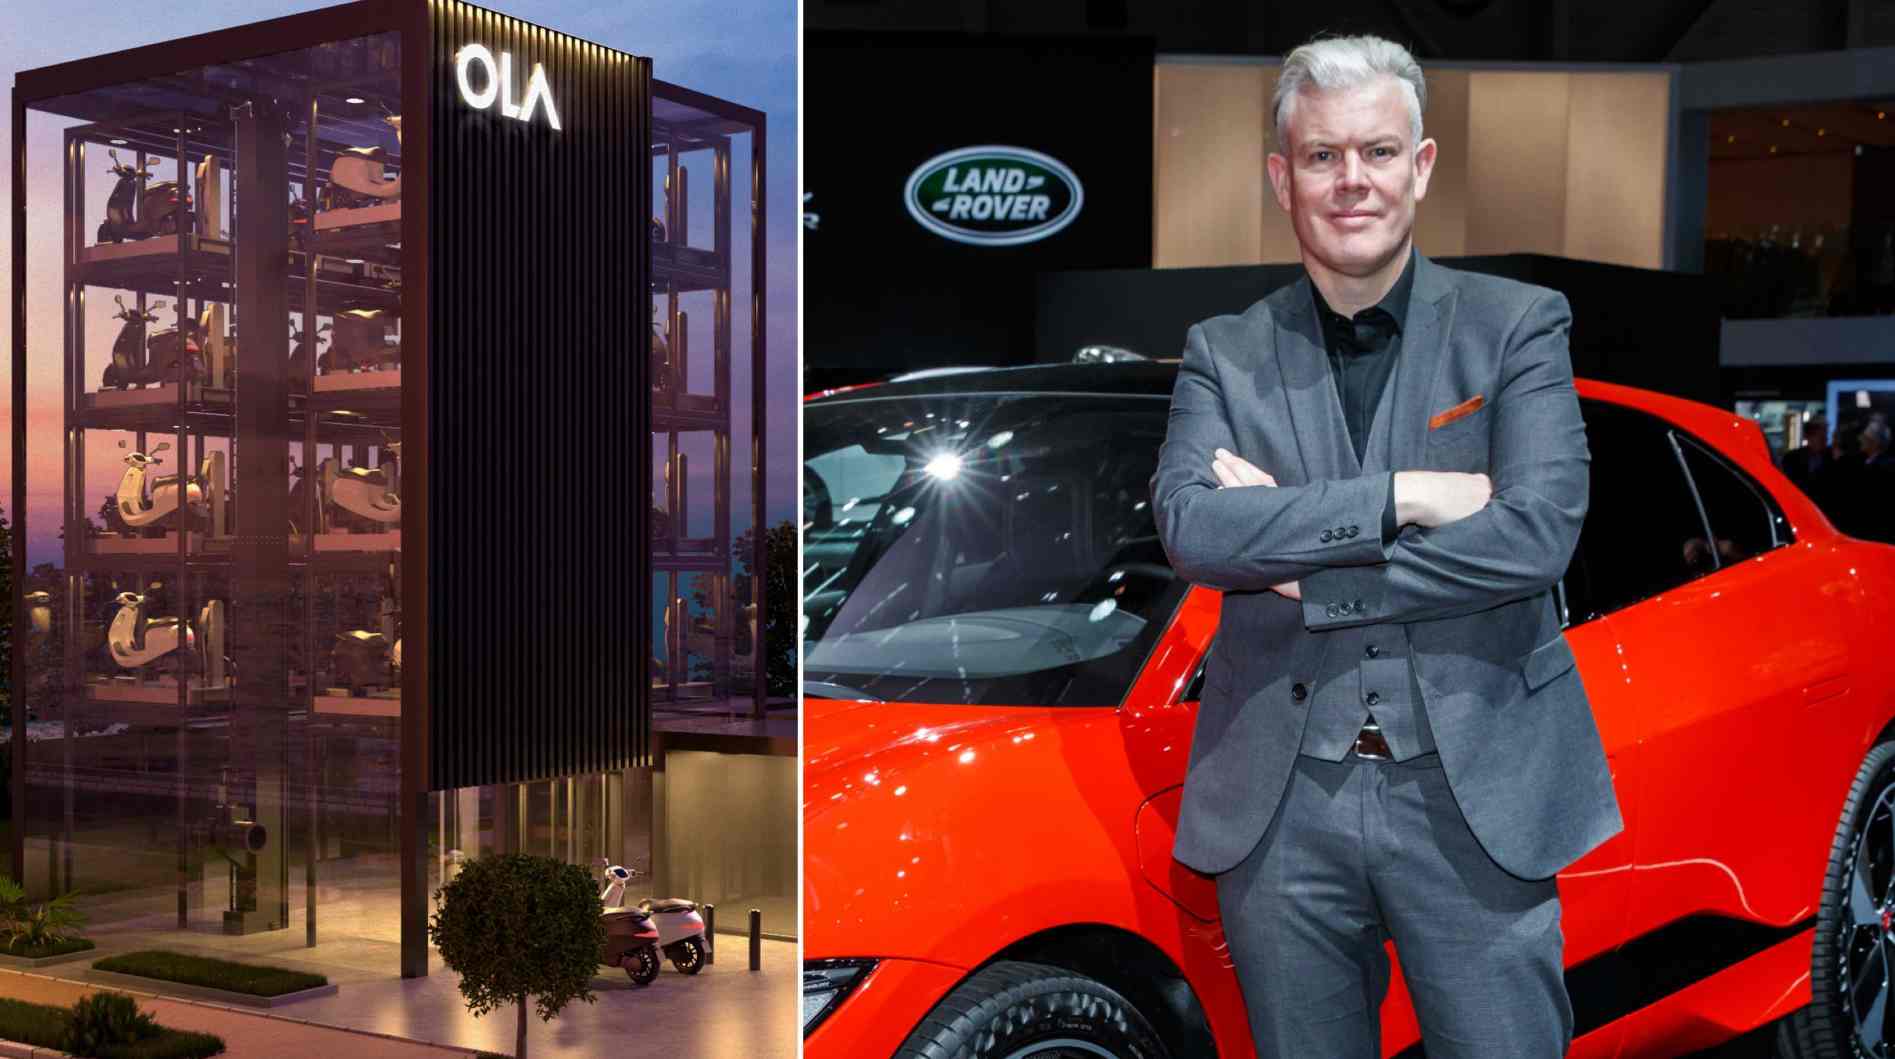 Burgess will lead the design process for Ola Electric's entire product range including scooters, bikes, cars and more, the company said in a statement. Image: Ola Electric/Jaguar/Tech2